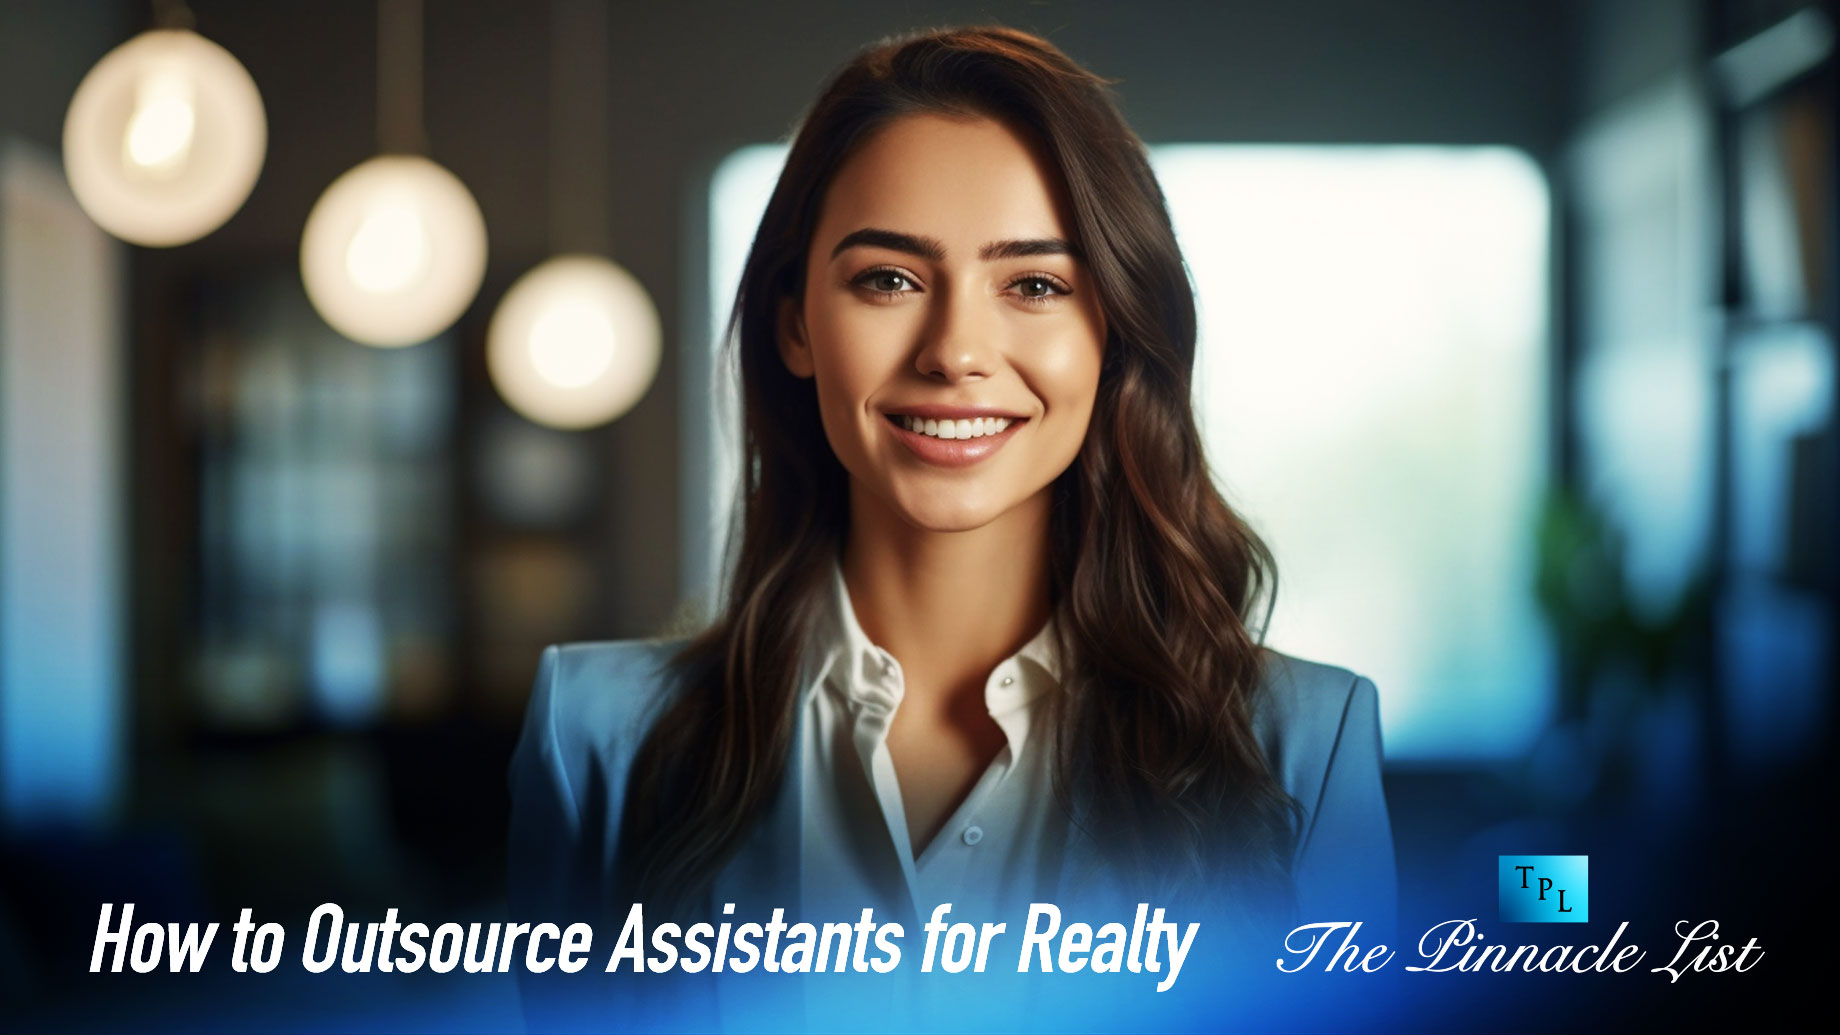 How to Outsource Assistants for Realty